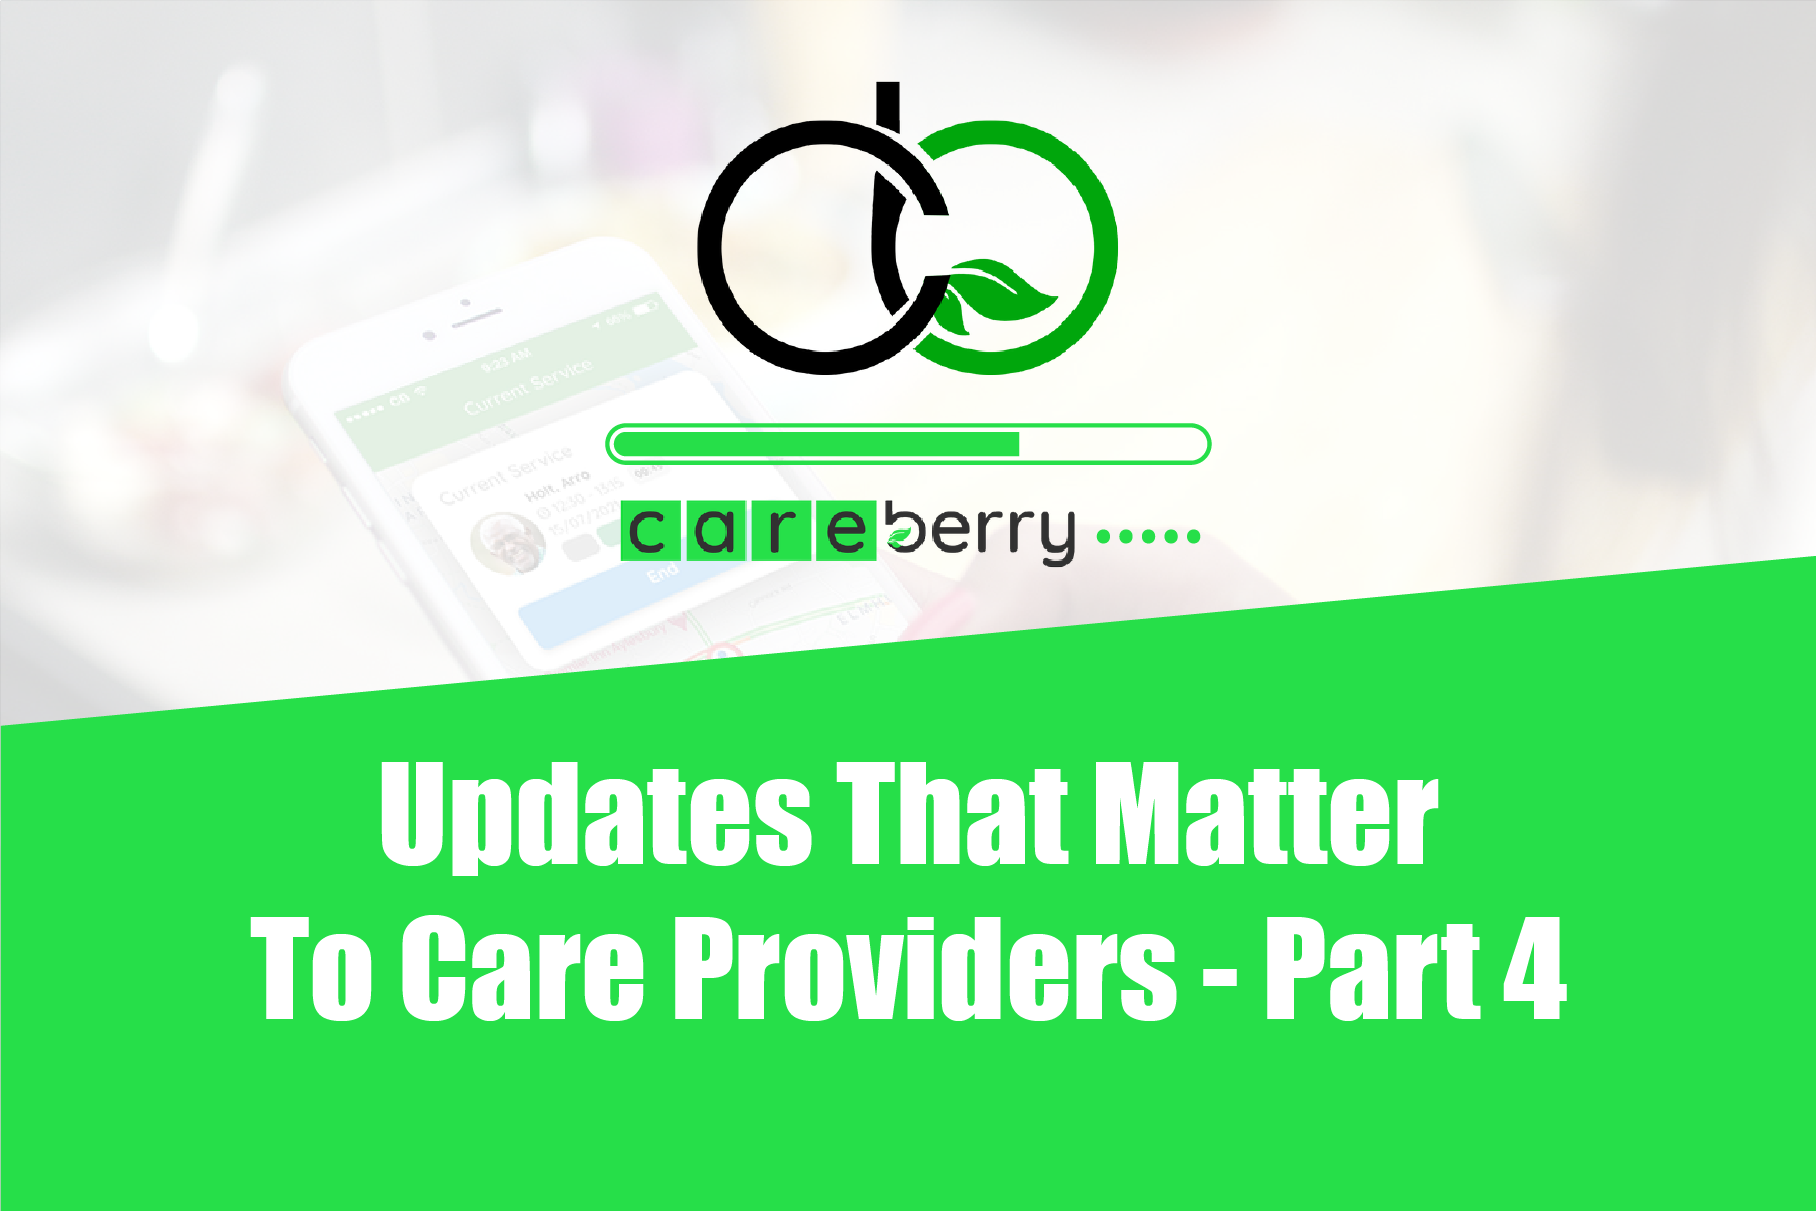 Updates That Matter to Care Providers - Part 4